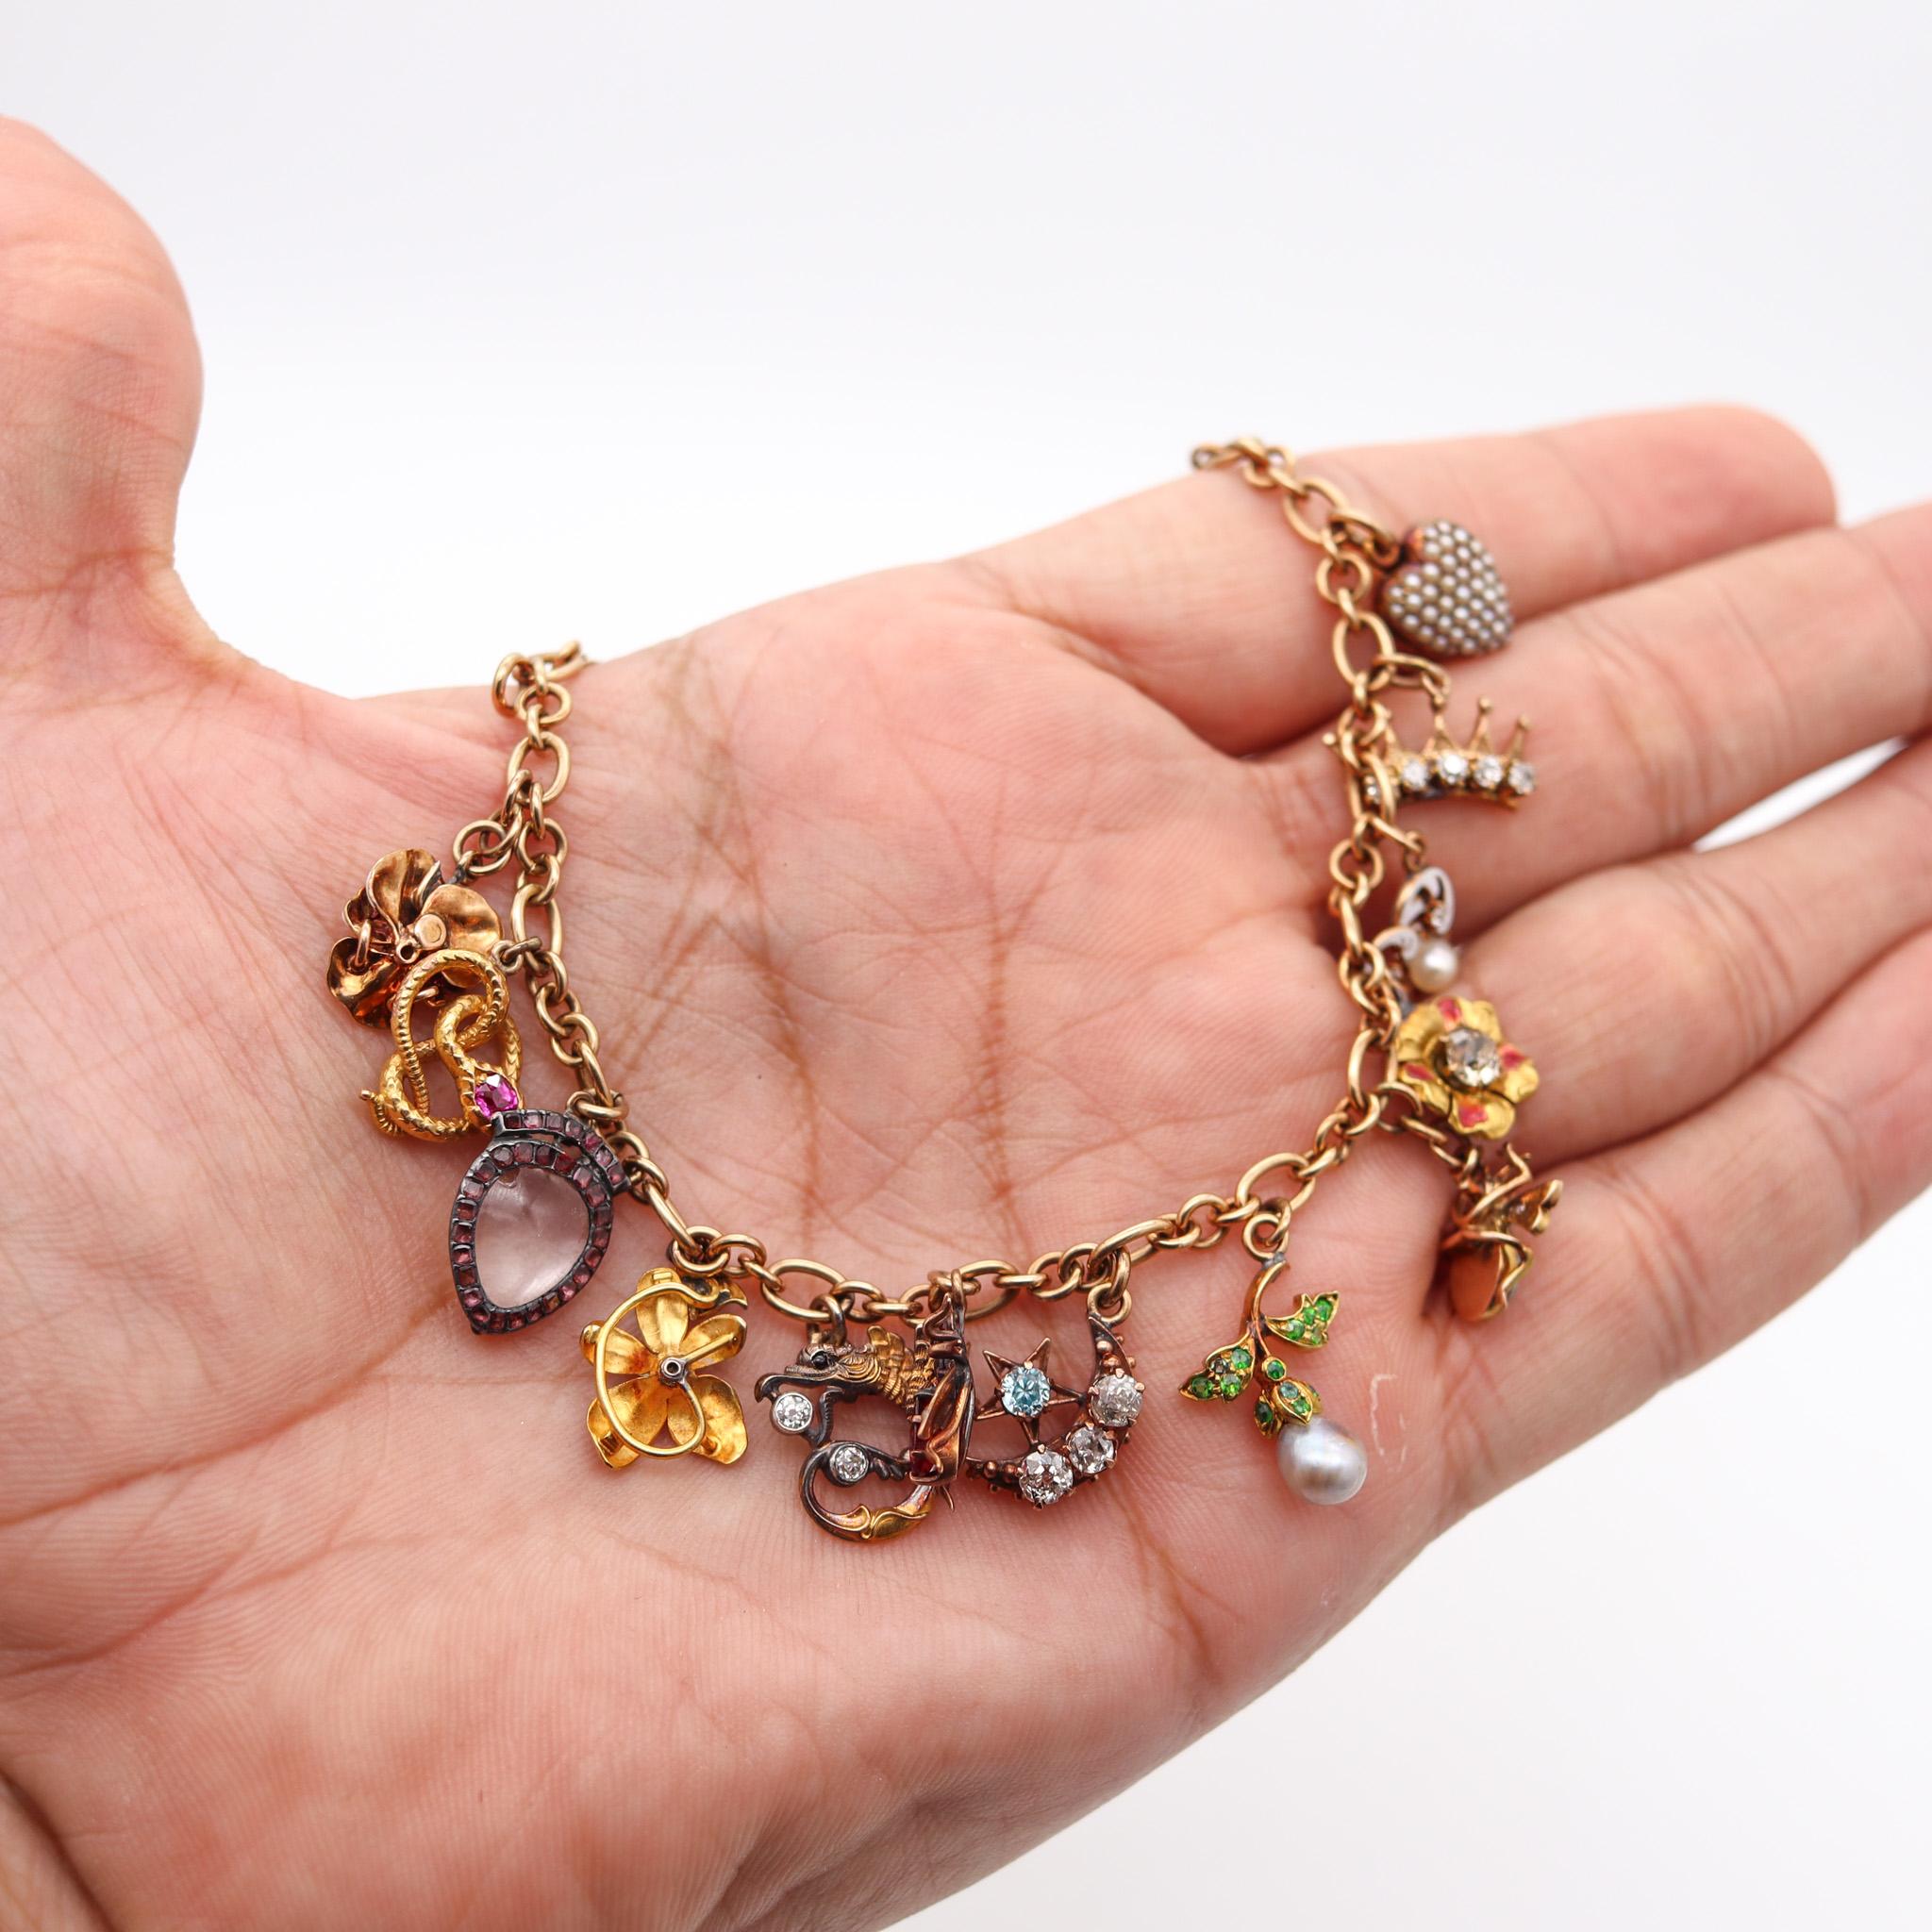 Art Nouveau 1910 Charms Bracelet In 14Kt Gold With Multi Gemstones And Enamels For Sale 2